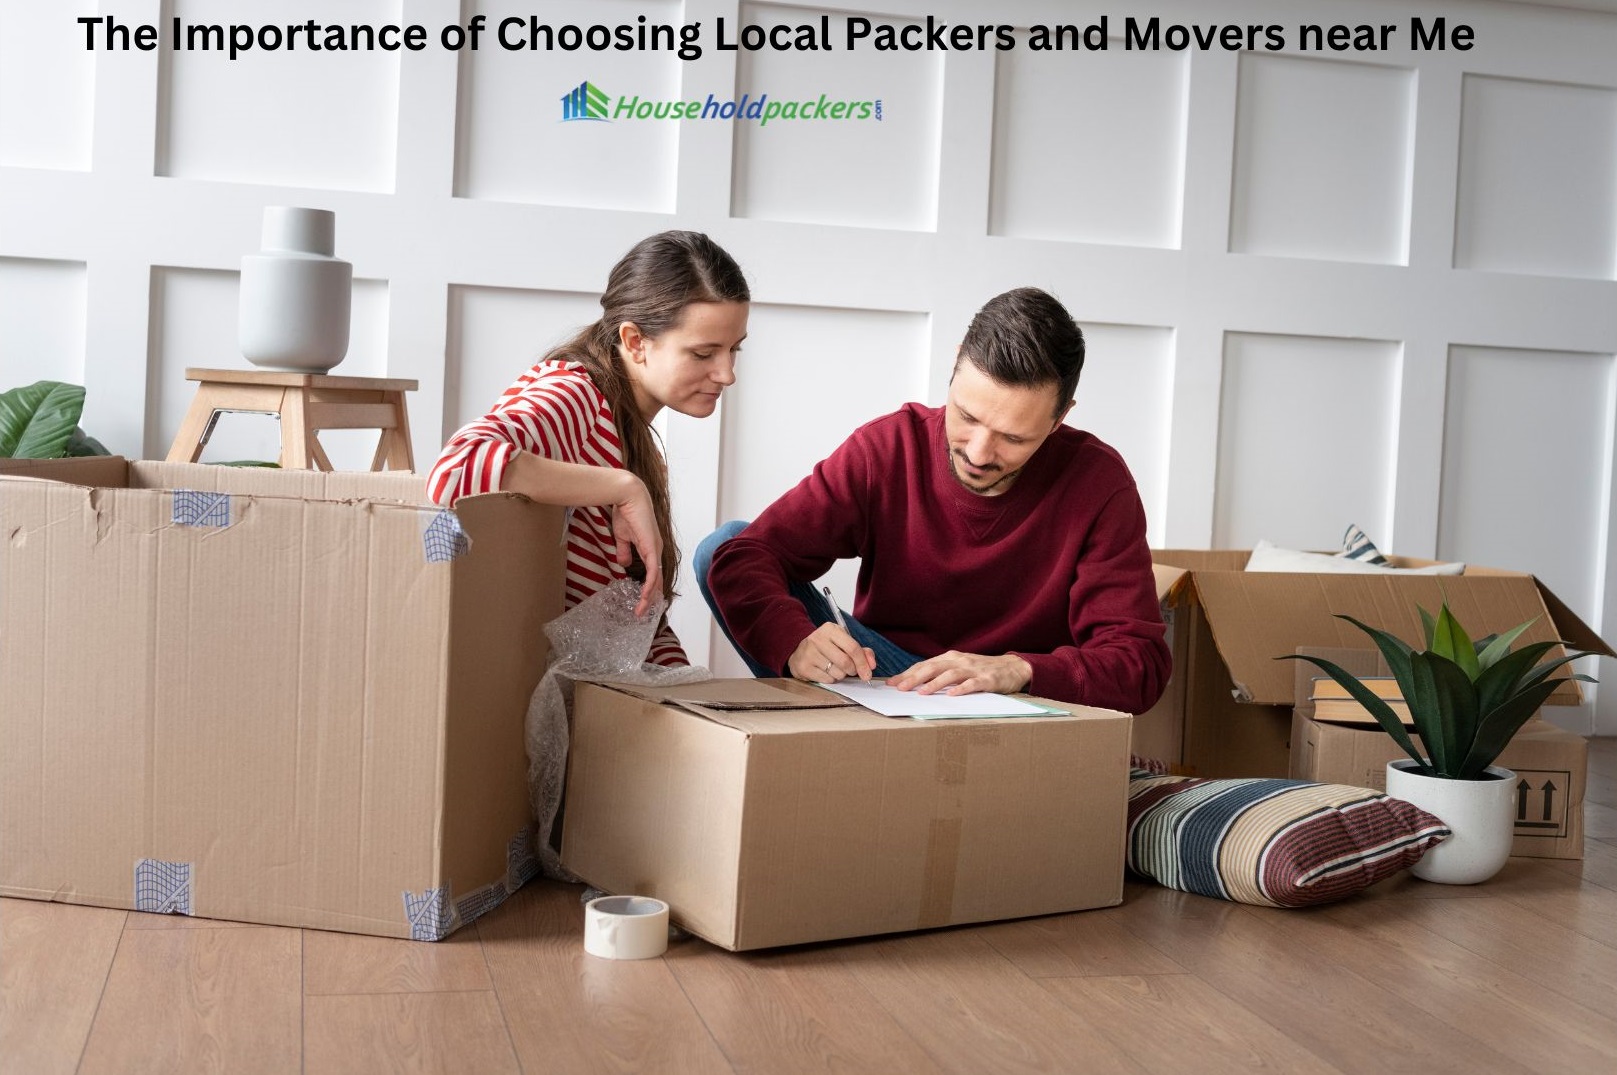 The Importance of Choosing Local Packers and Movers near Me